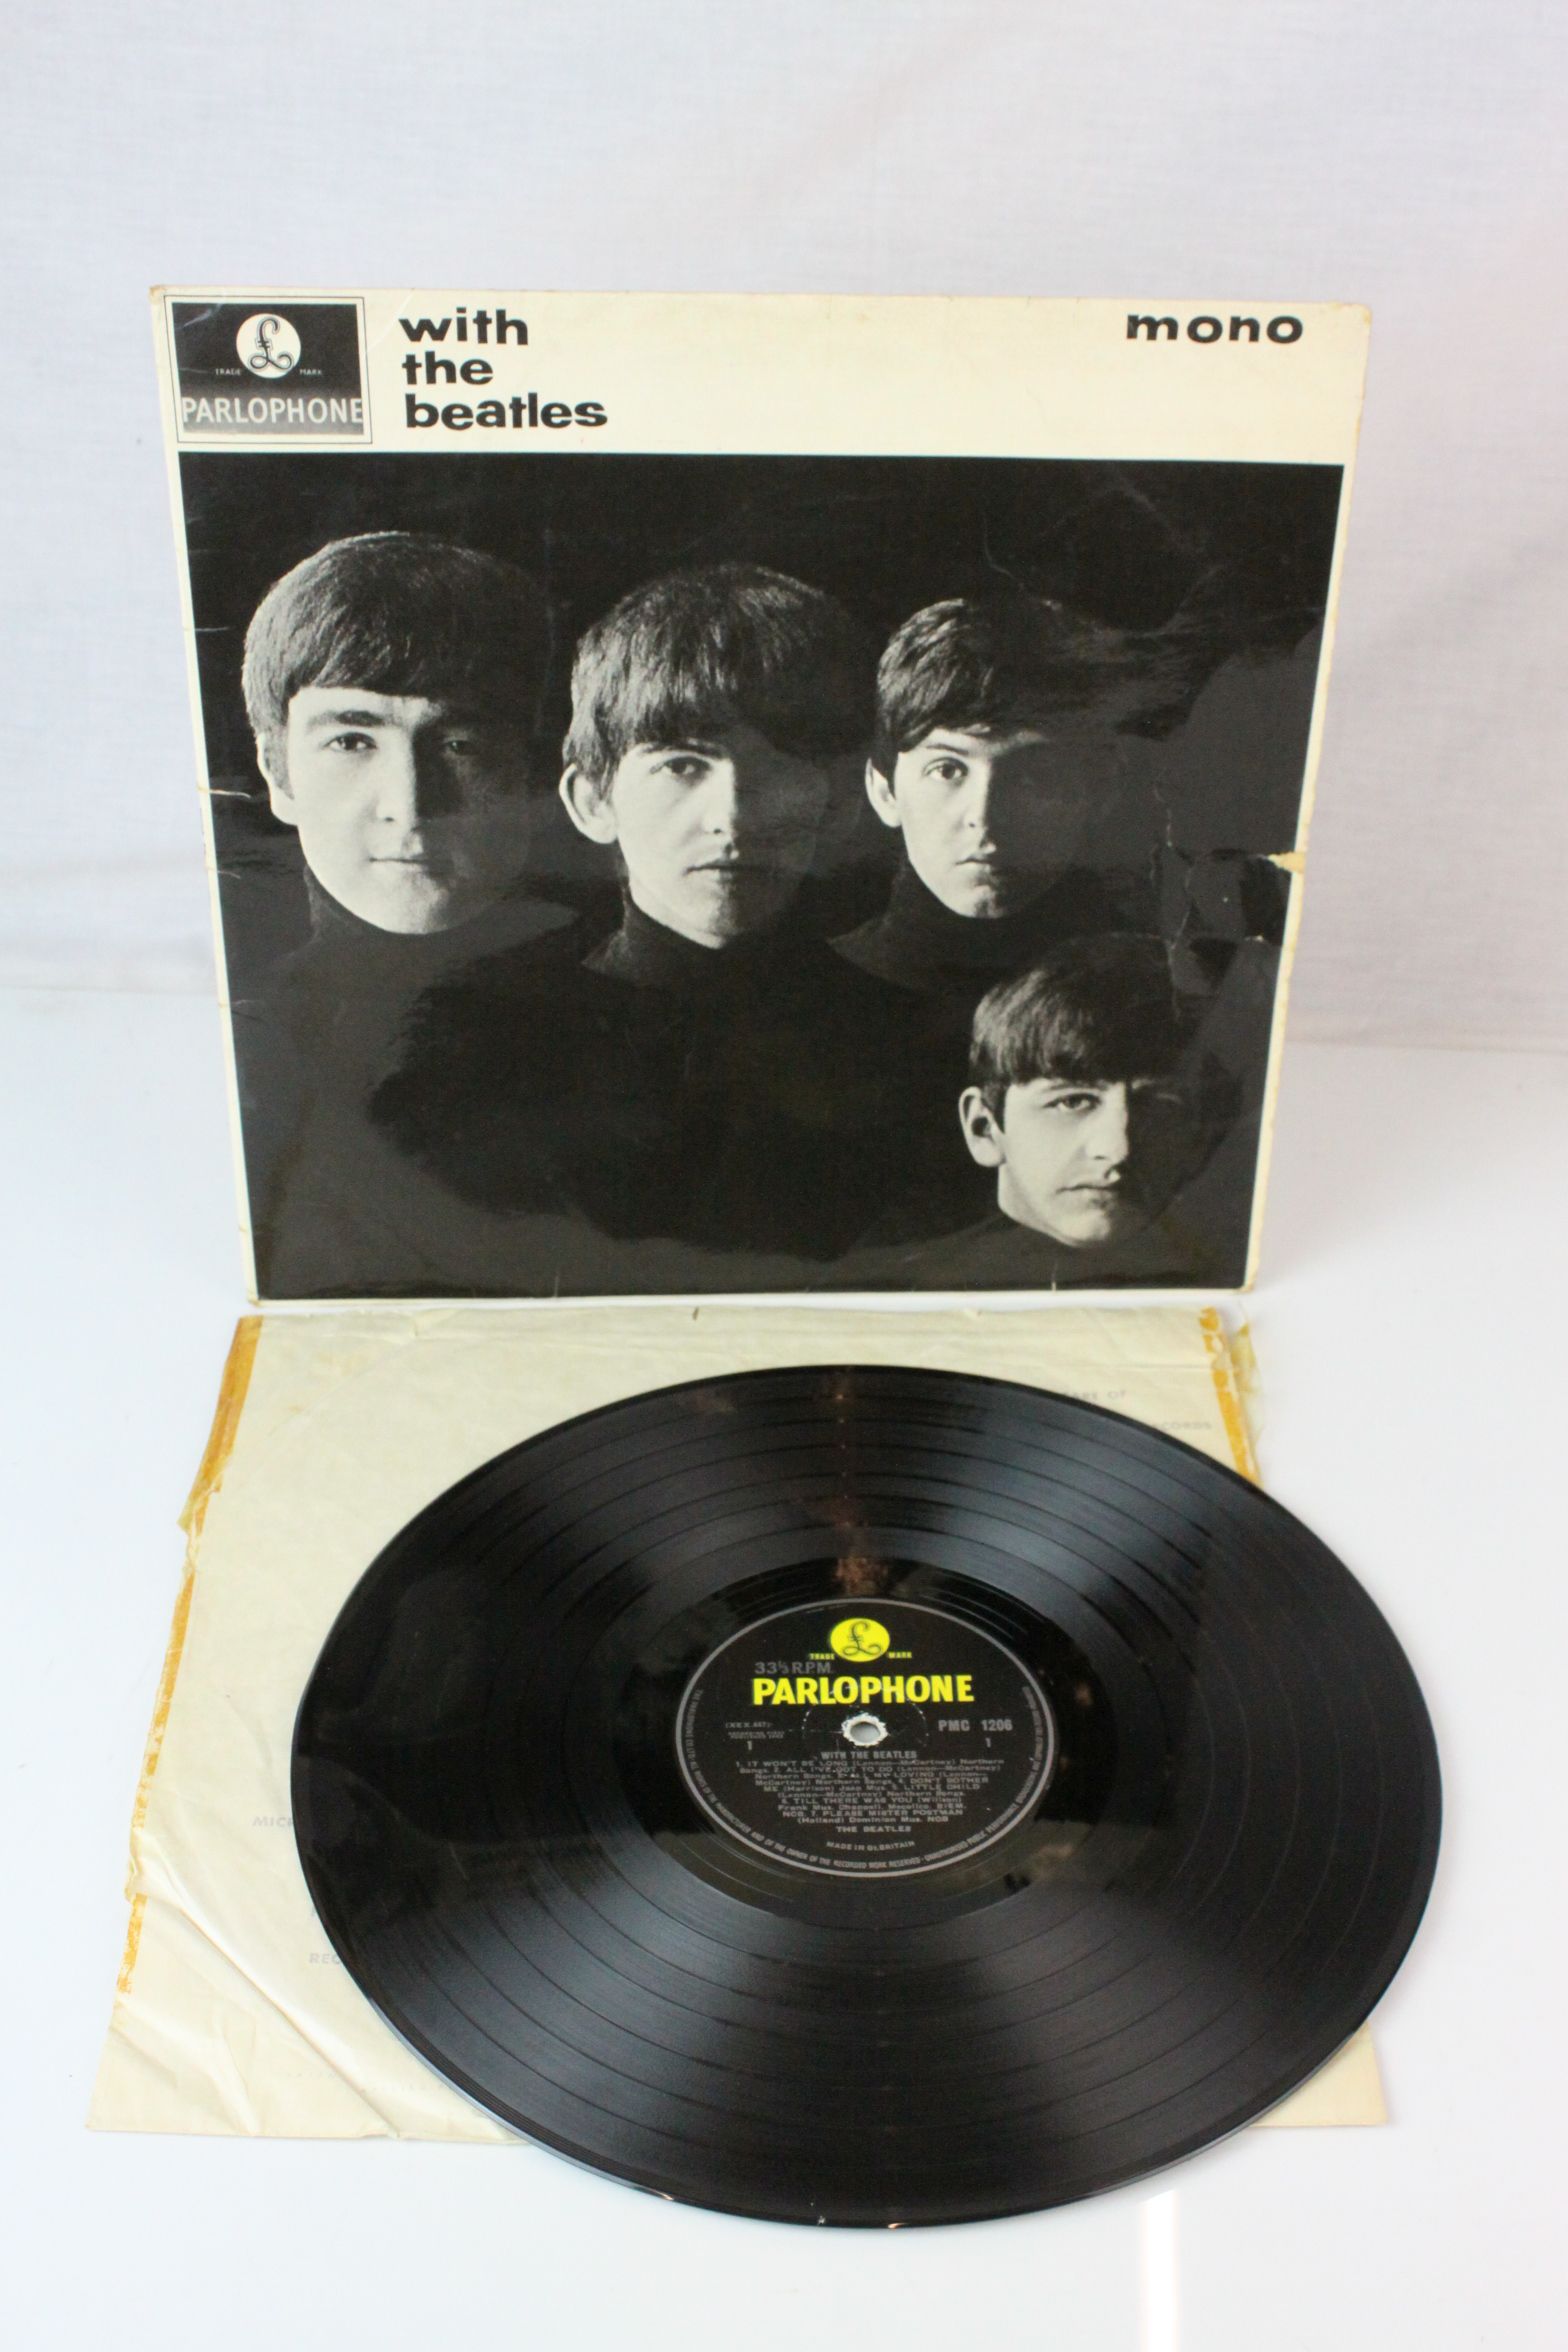 Vinyl - Four The Beatles LPs to include For Sale PMC1240 mono, Revolver PMC7009 mono, With The - Image 8 of 21